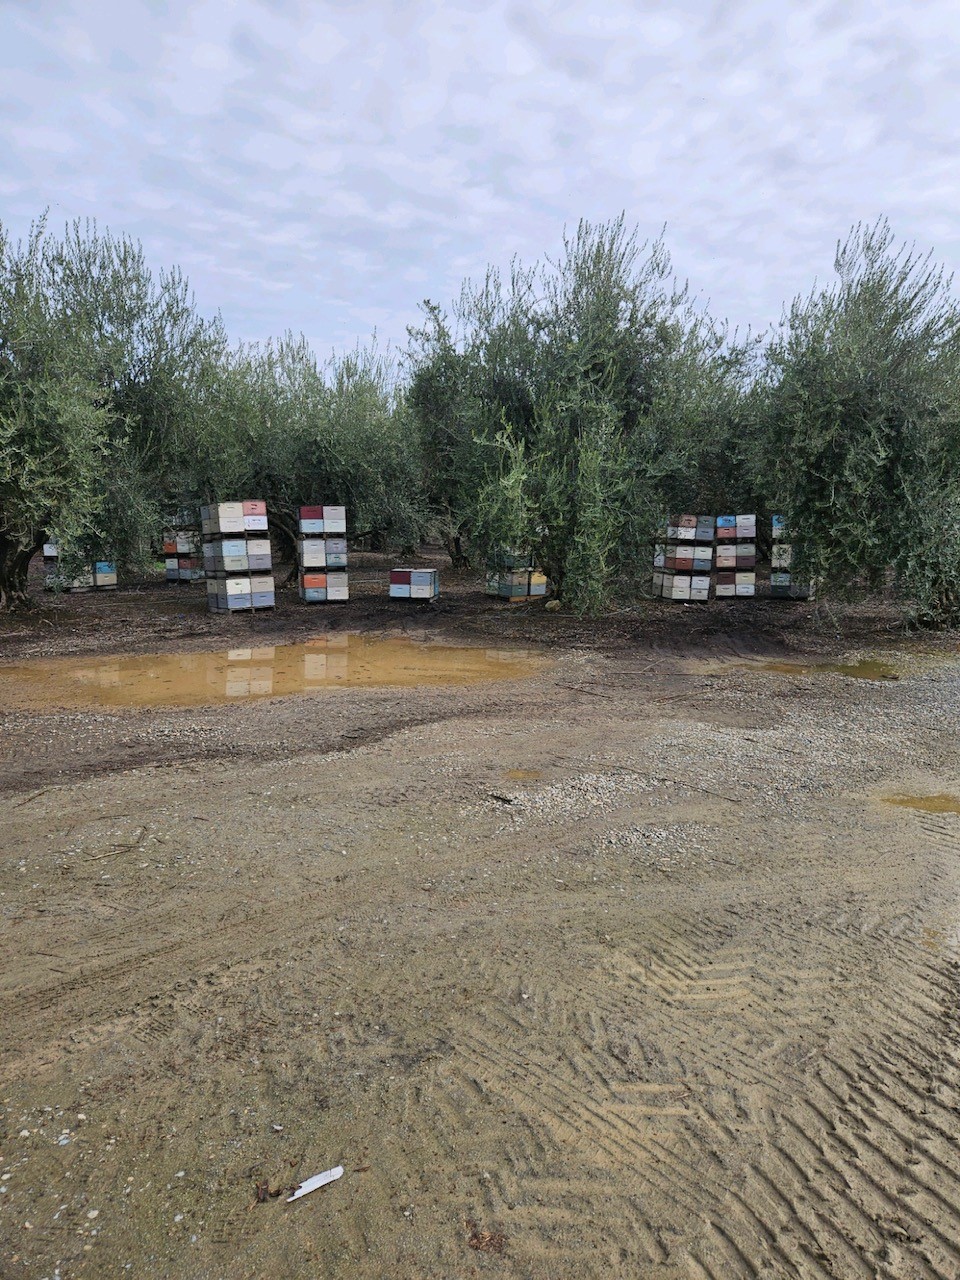 Bees in olives.